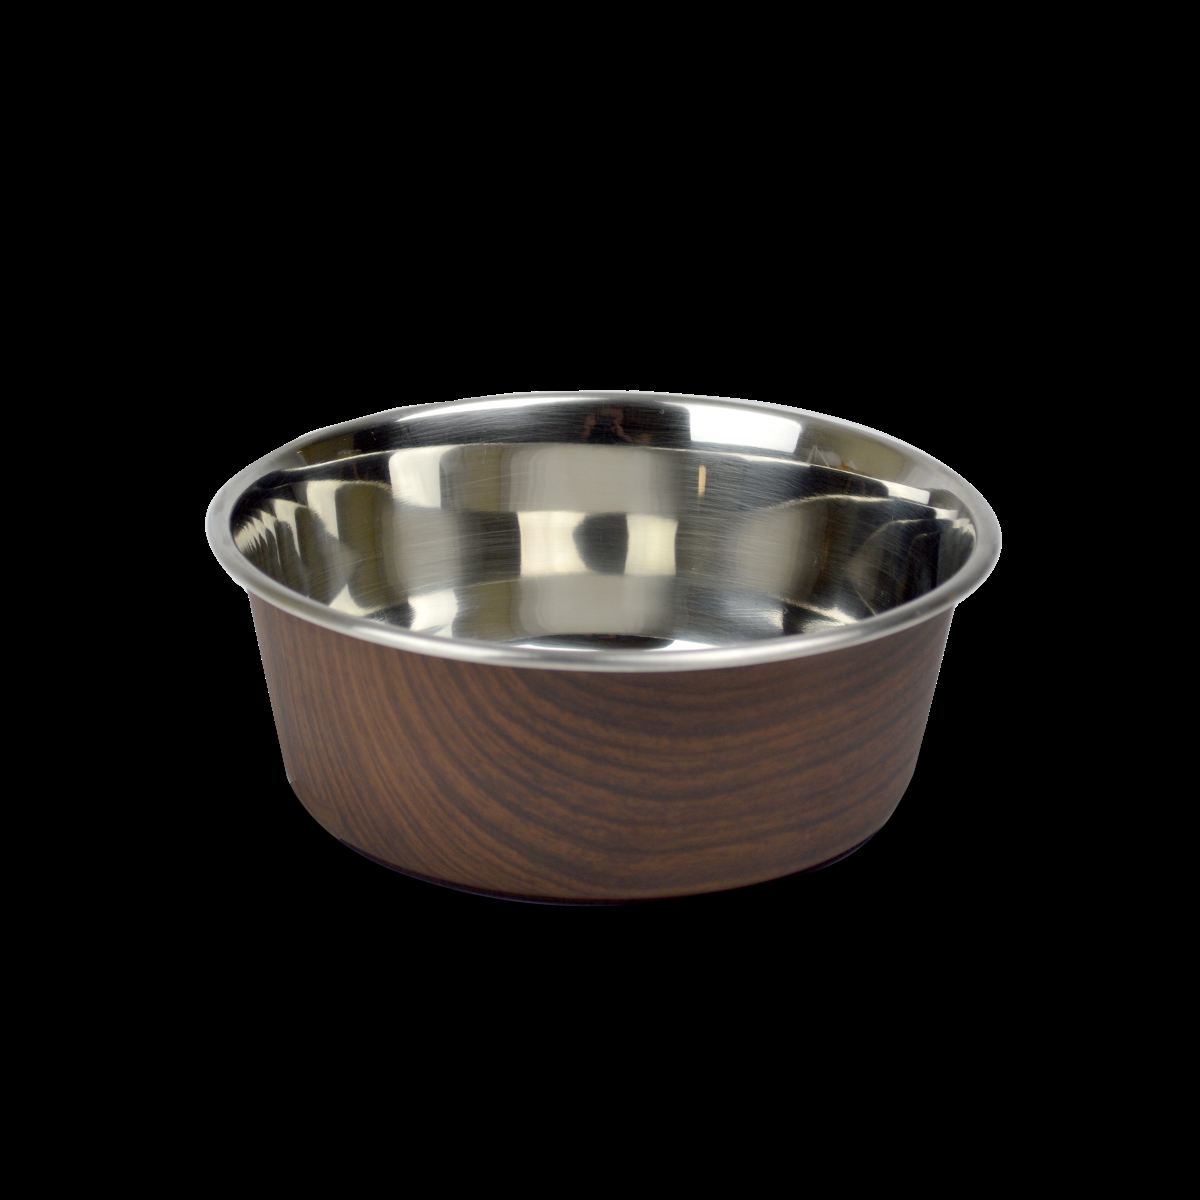 Picture of OurPets 780824136511 Durapet Wood Grain Pet Bowl - Dark Brown - 4 Piece